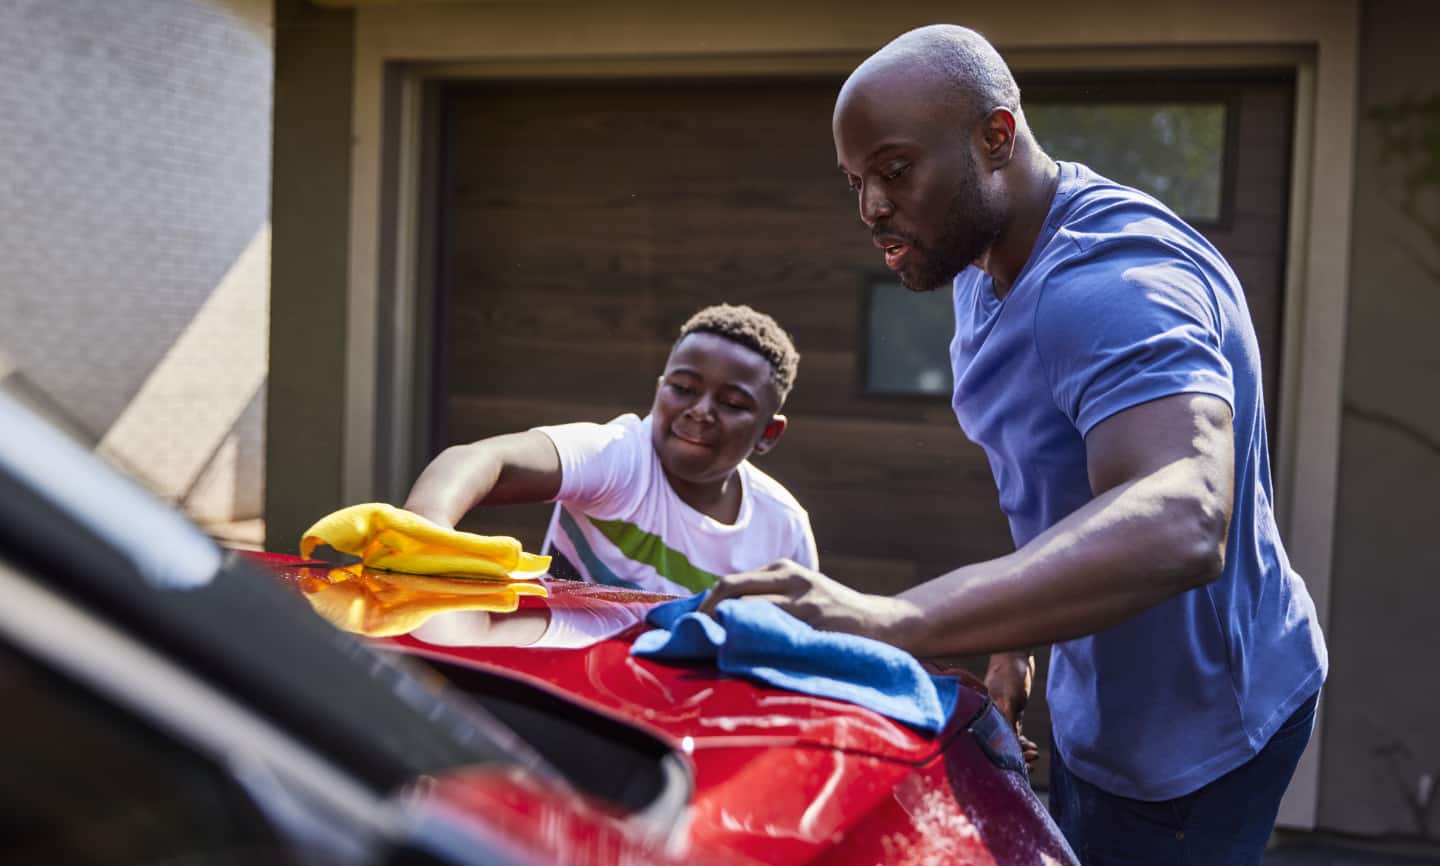 A father and son cleaning a car with Simoniz Microfibre towels.